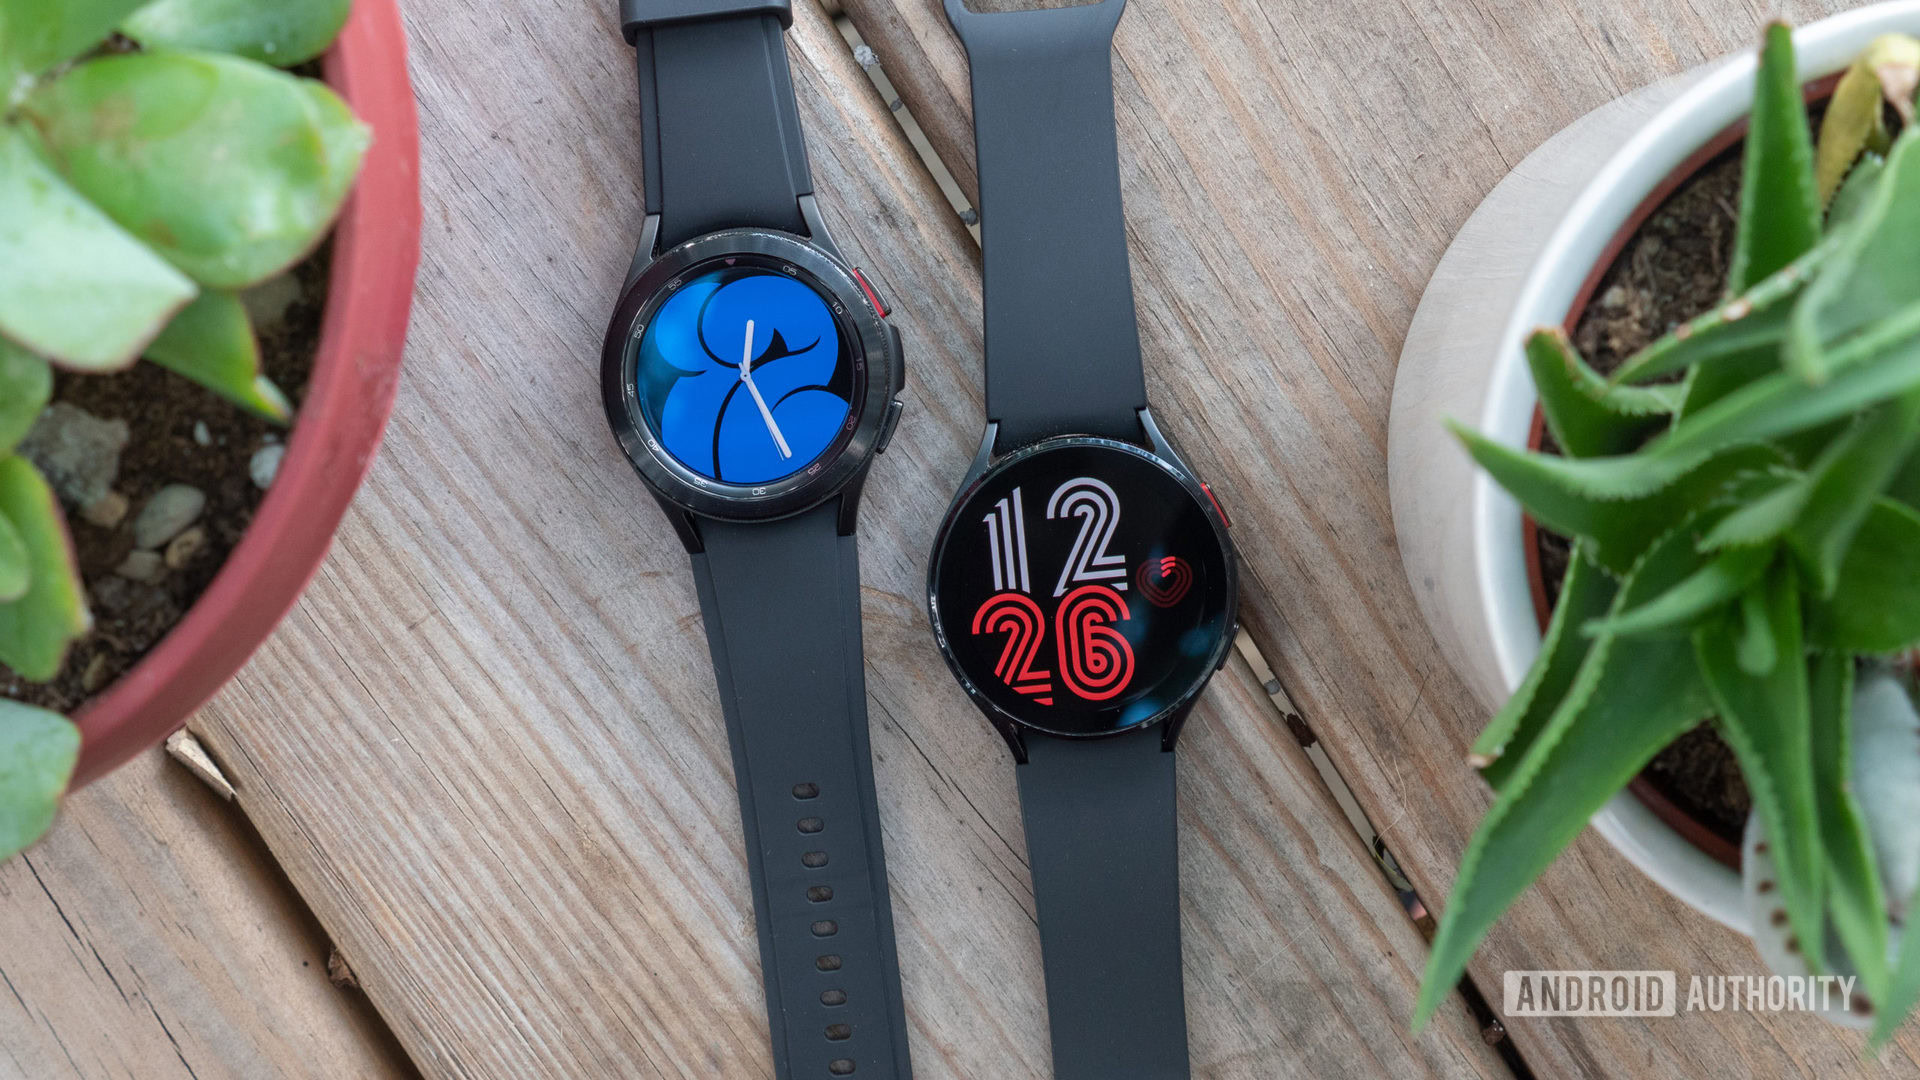 The Samsung Galaxy Watch 4 and Samsung Galaxy Watch 4 Classic on a table.